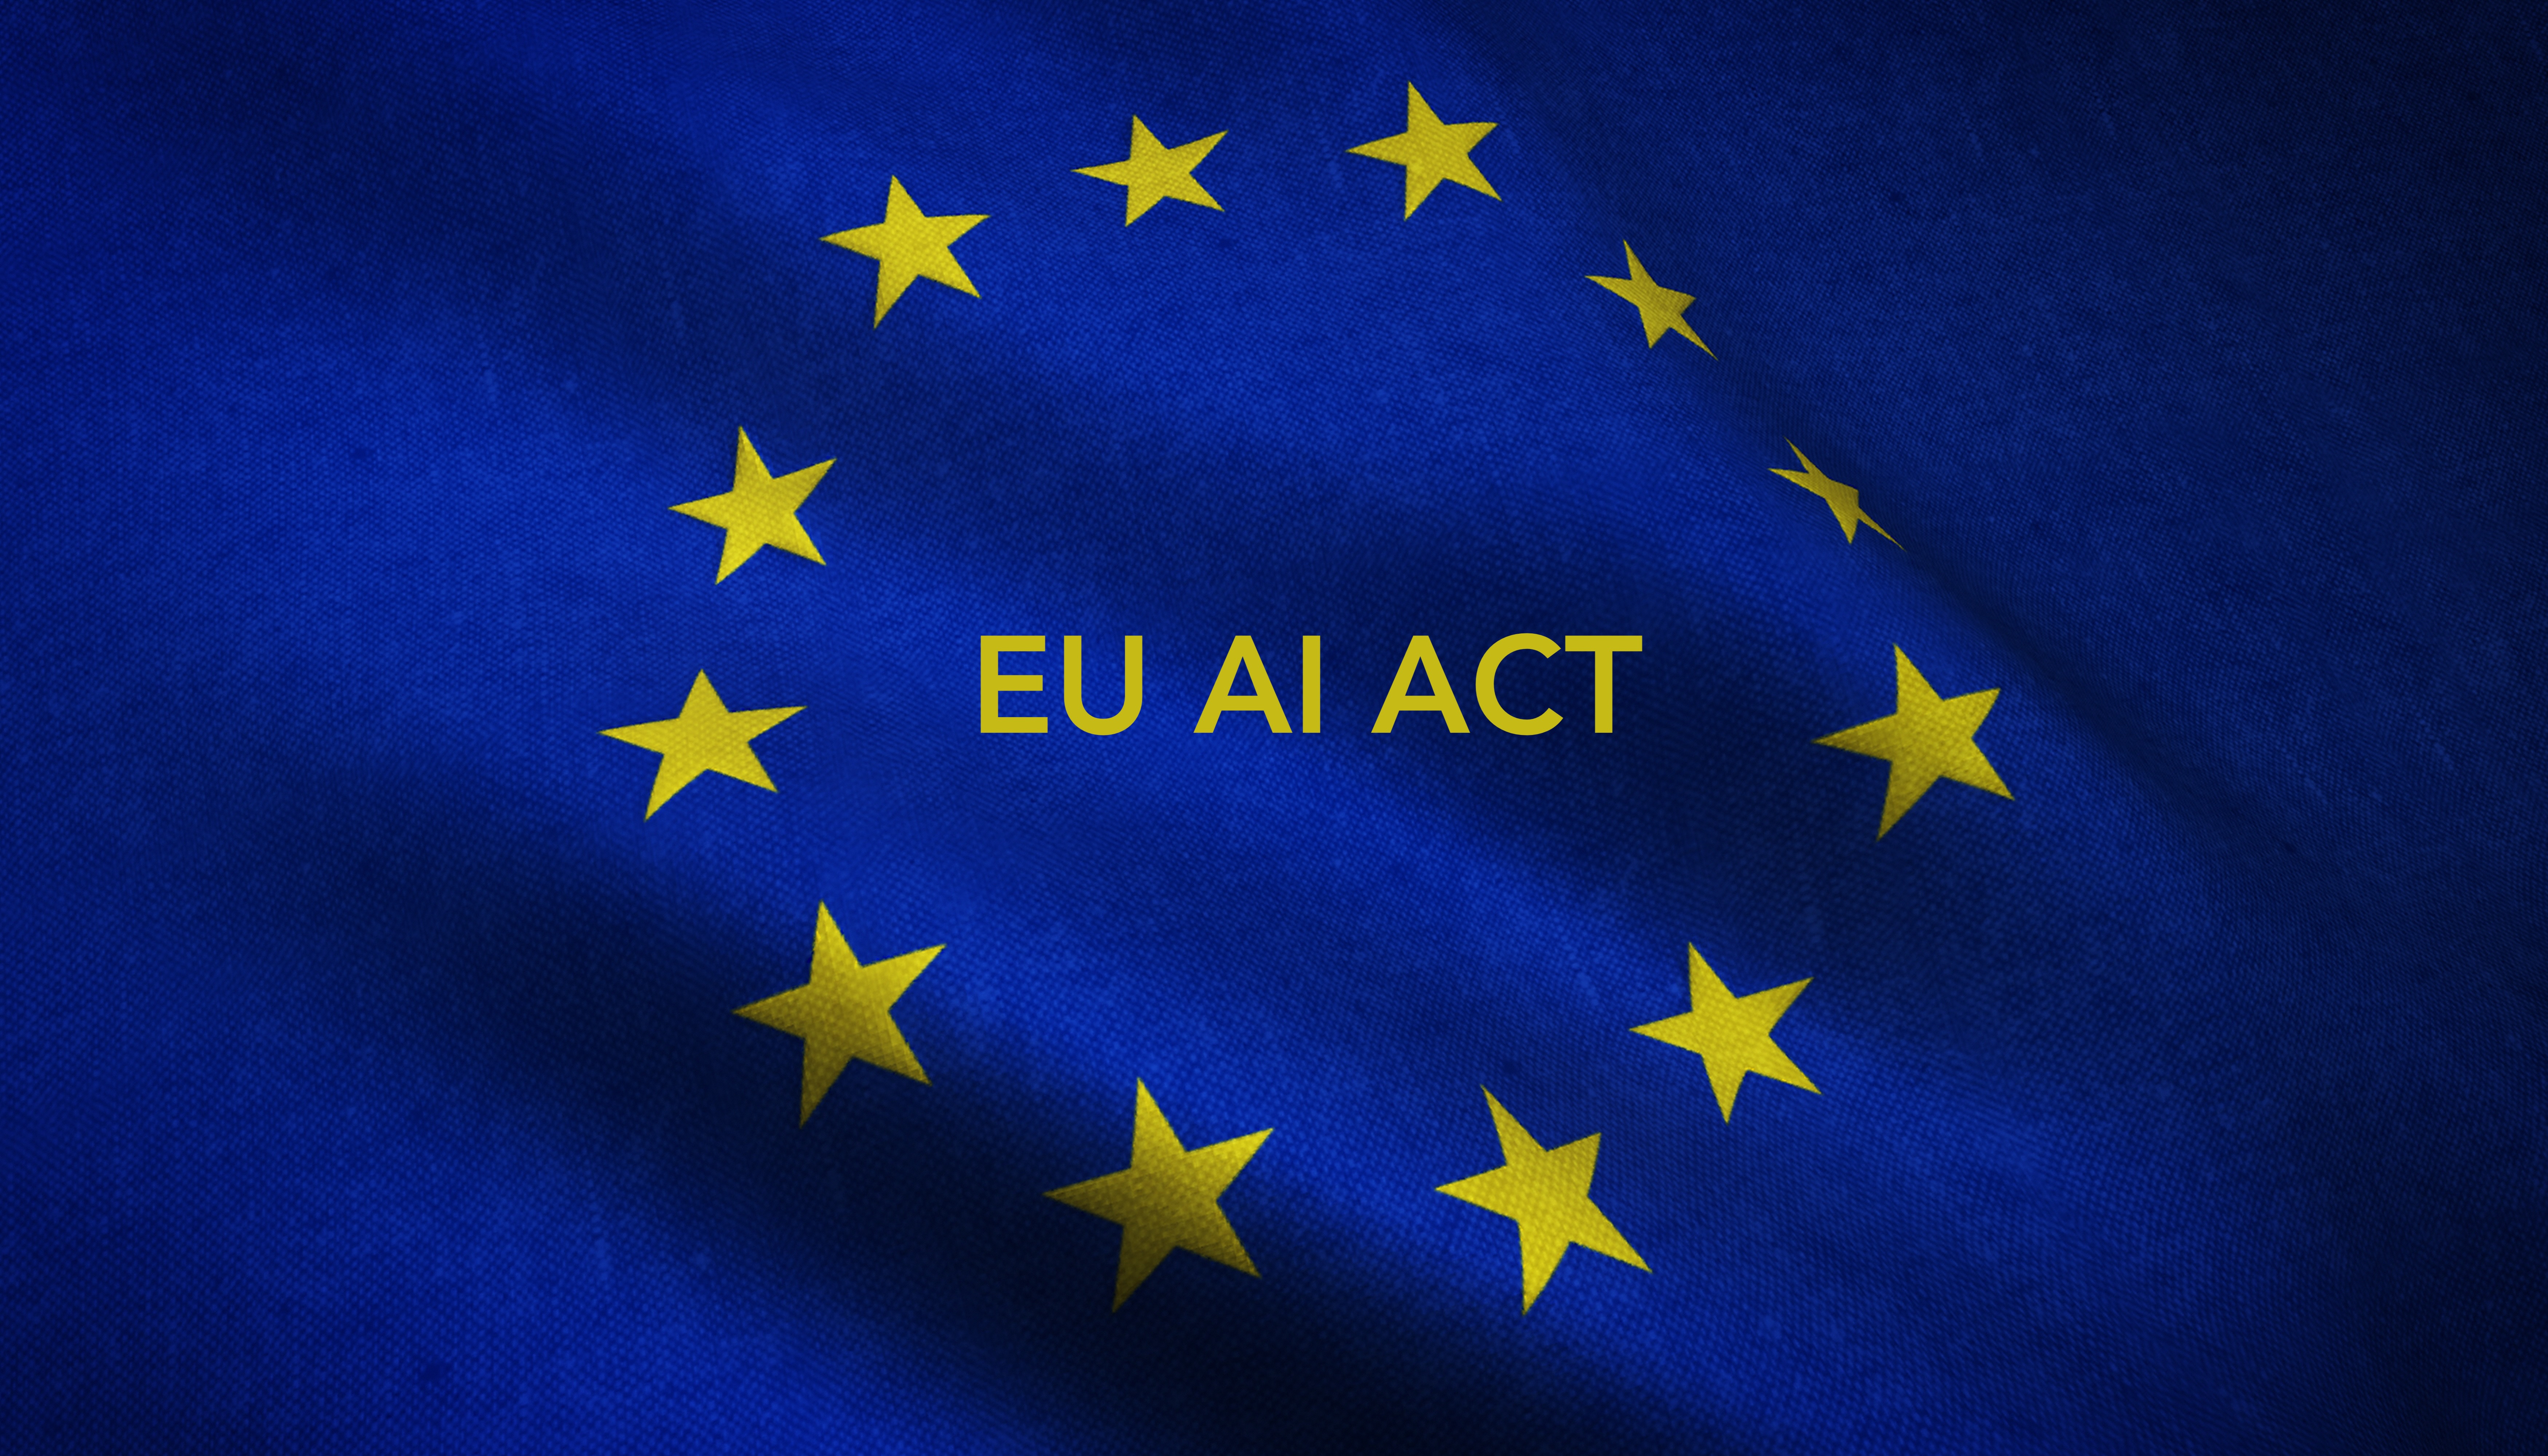 AI Act Flag (realized on the Image by wirestock on Freepik)